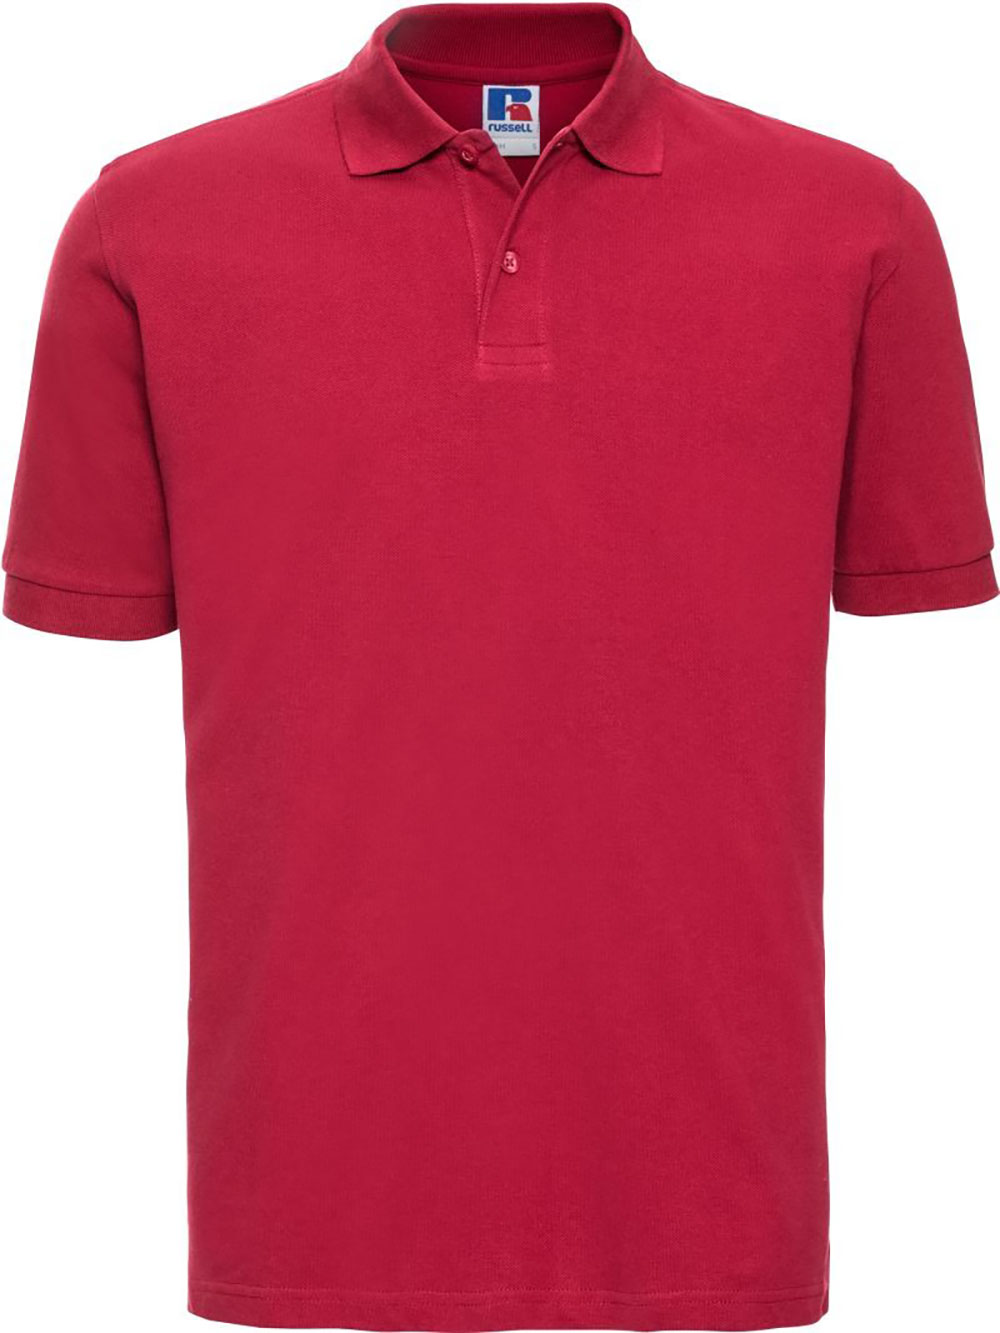 Russell 569M Poloshirt Baumwolle / classic red